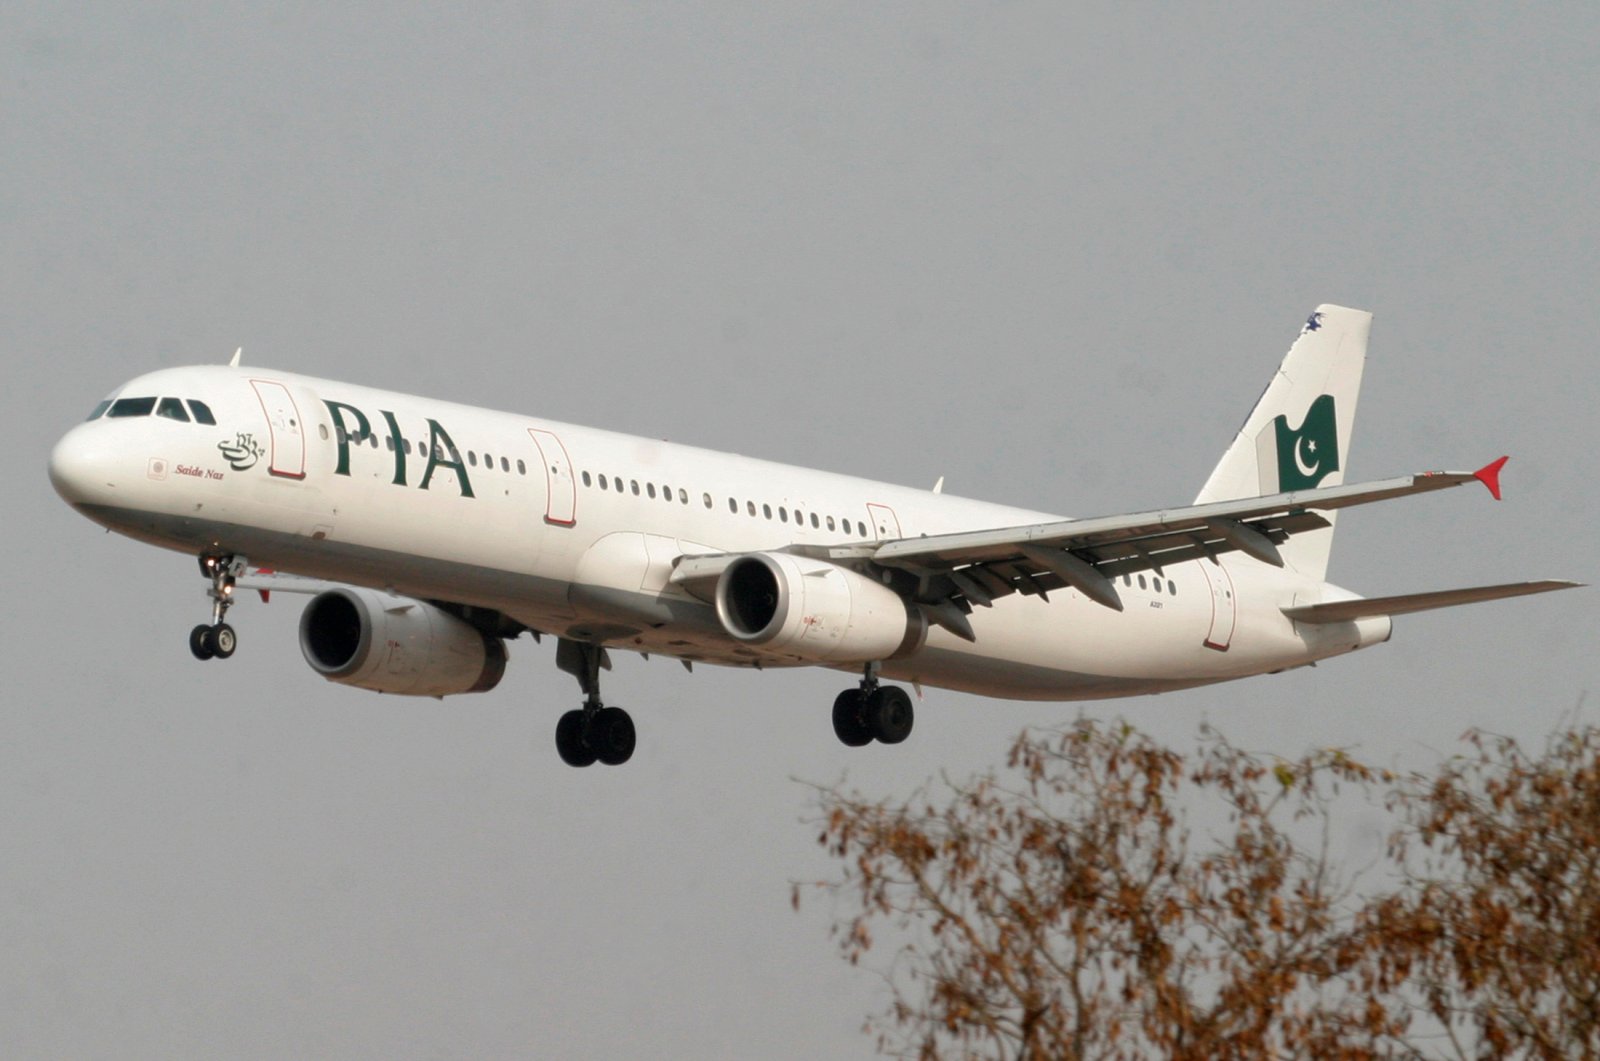 A Pakistan International Airlines plane prepares to land at Islamabad airport, Pakistan, Feb. 24, 2007. (Reuters Photo)